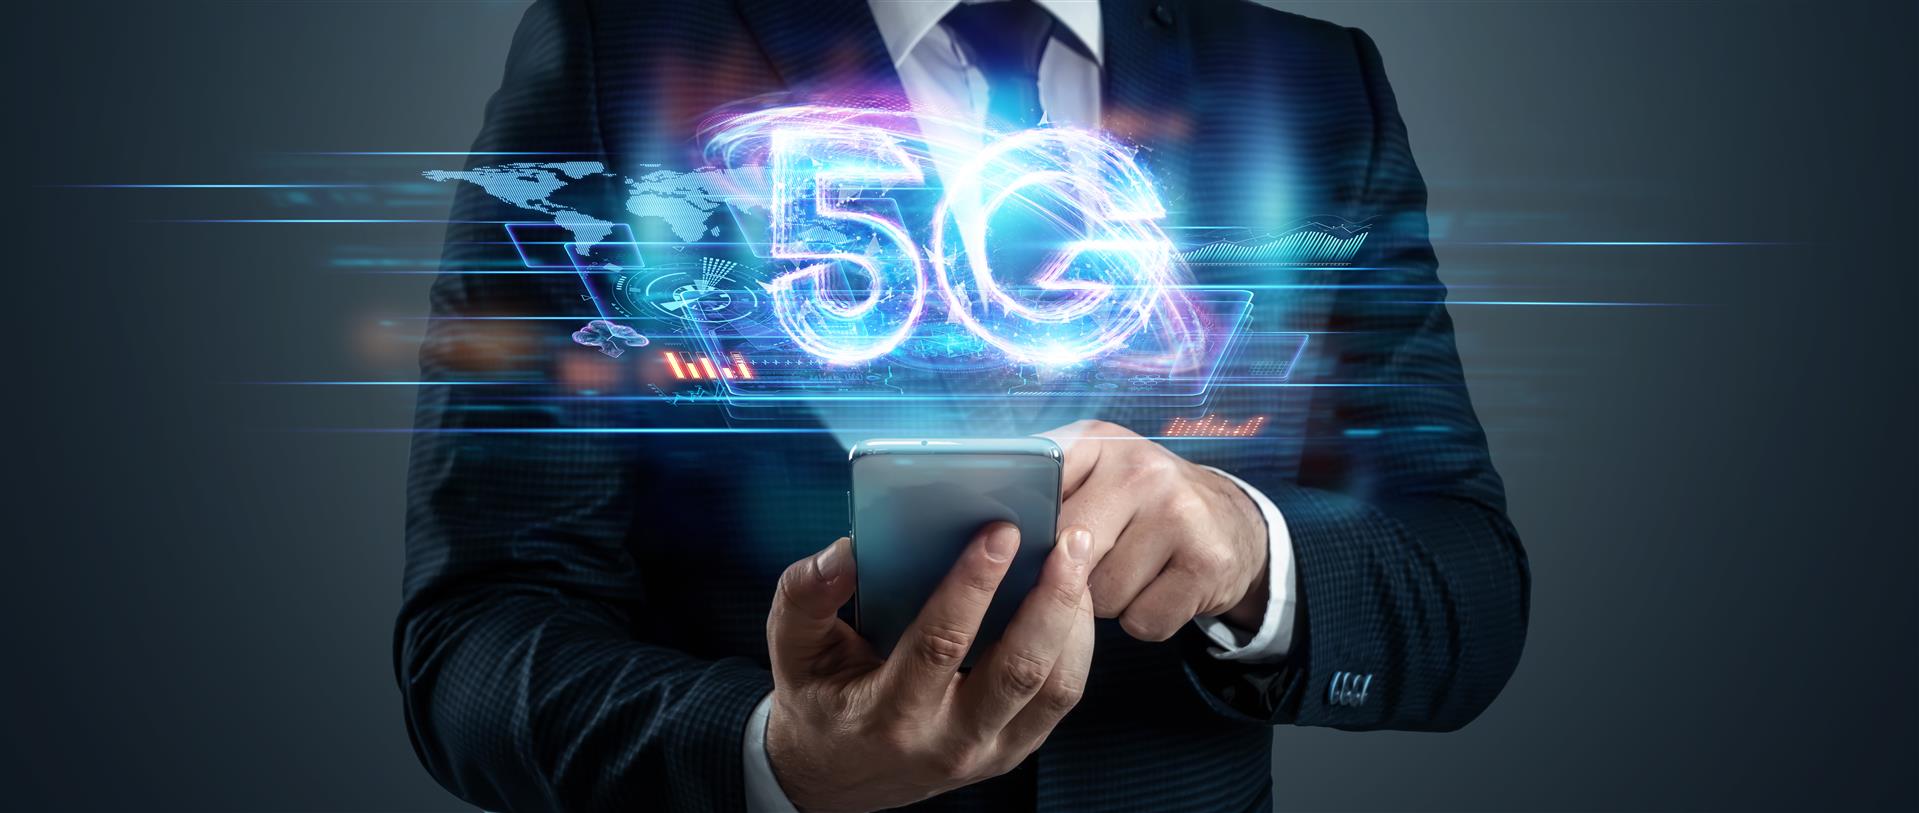 5G technology driving the Thai economy with investment by businesspeople